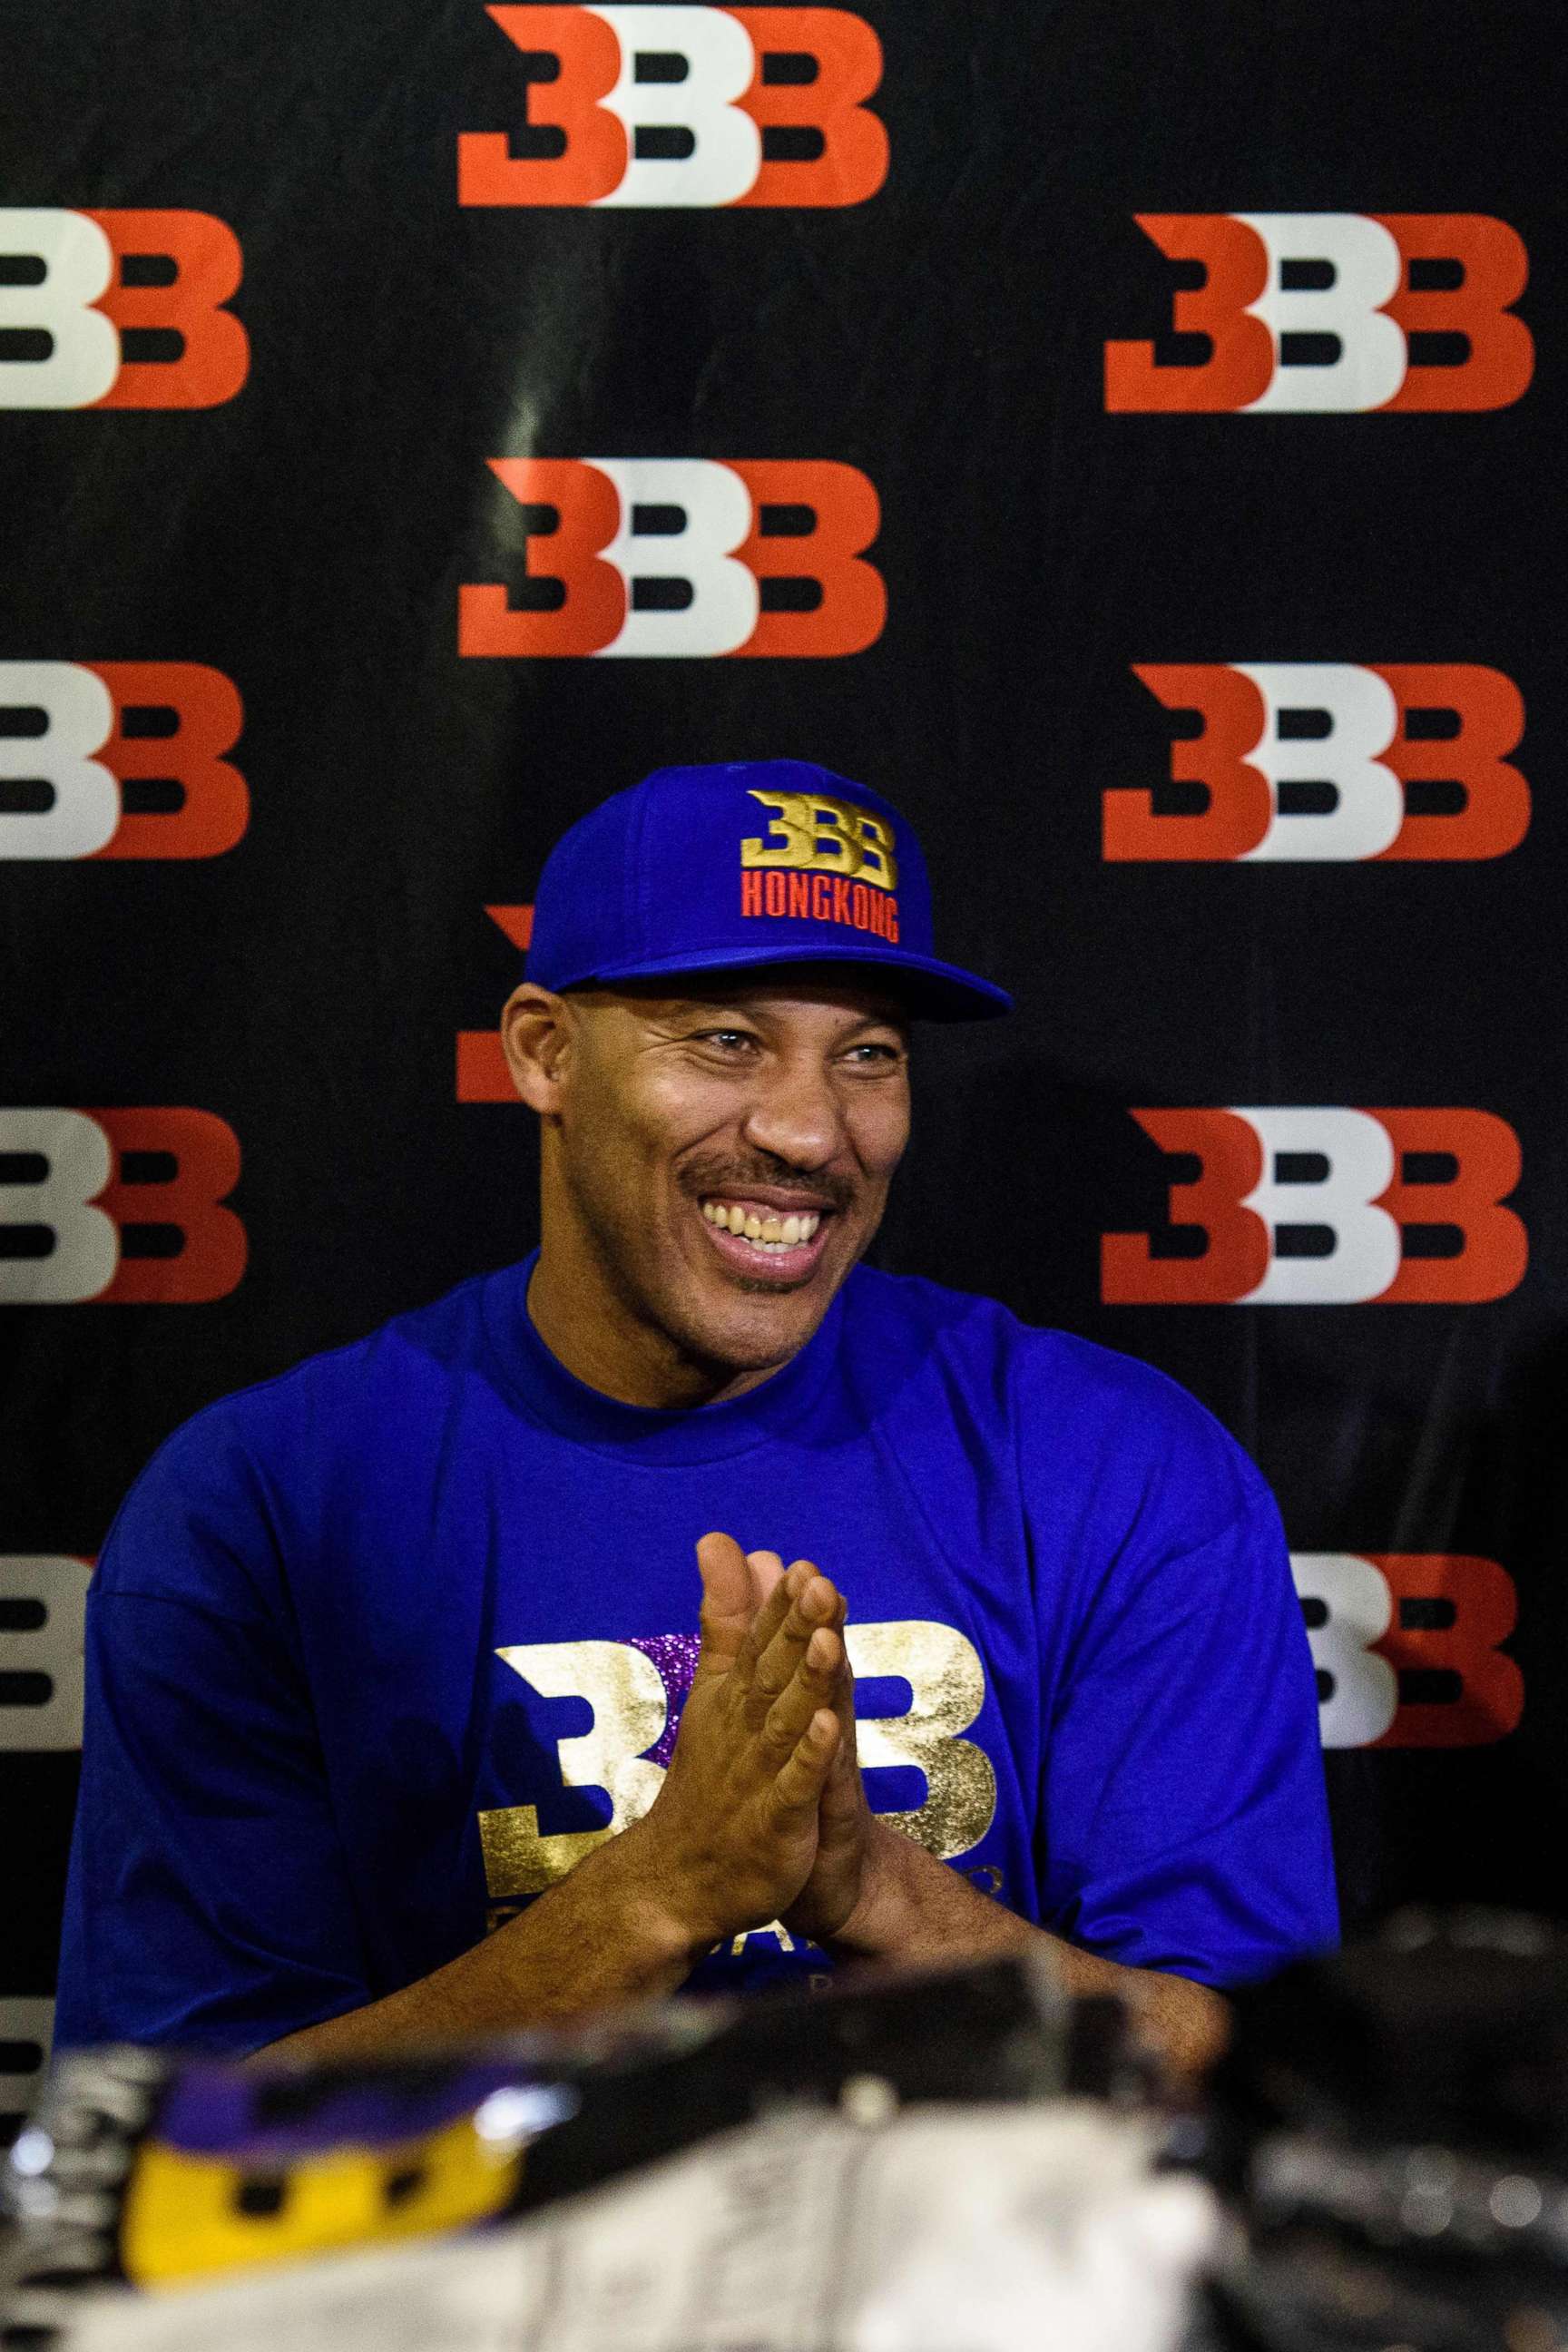 PHOTO: LaVar Ball, father of basketball player LiAngelo Ball and the owner of the Big Baller brand, reacts during a promotional event in Hong Kong, Nov. 14, 2017.
